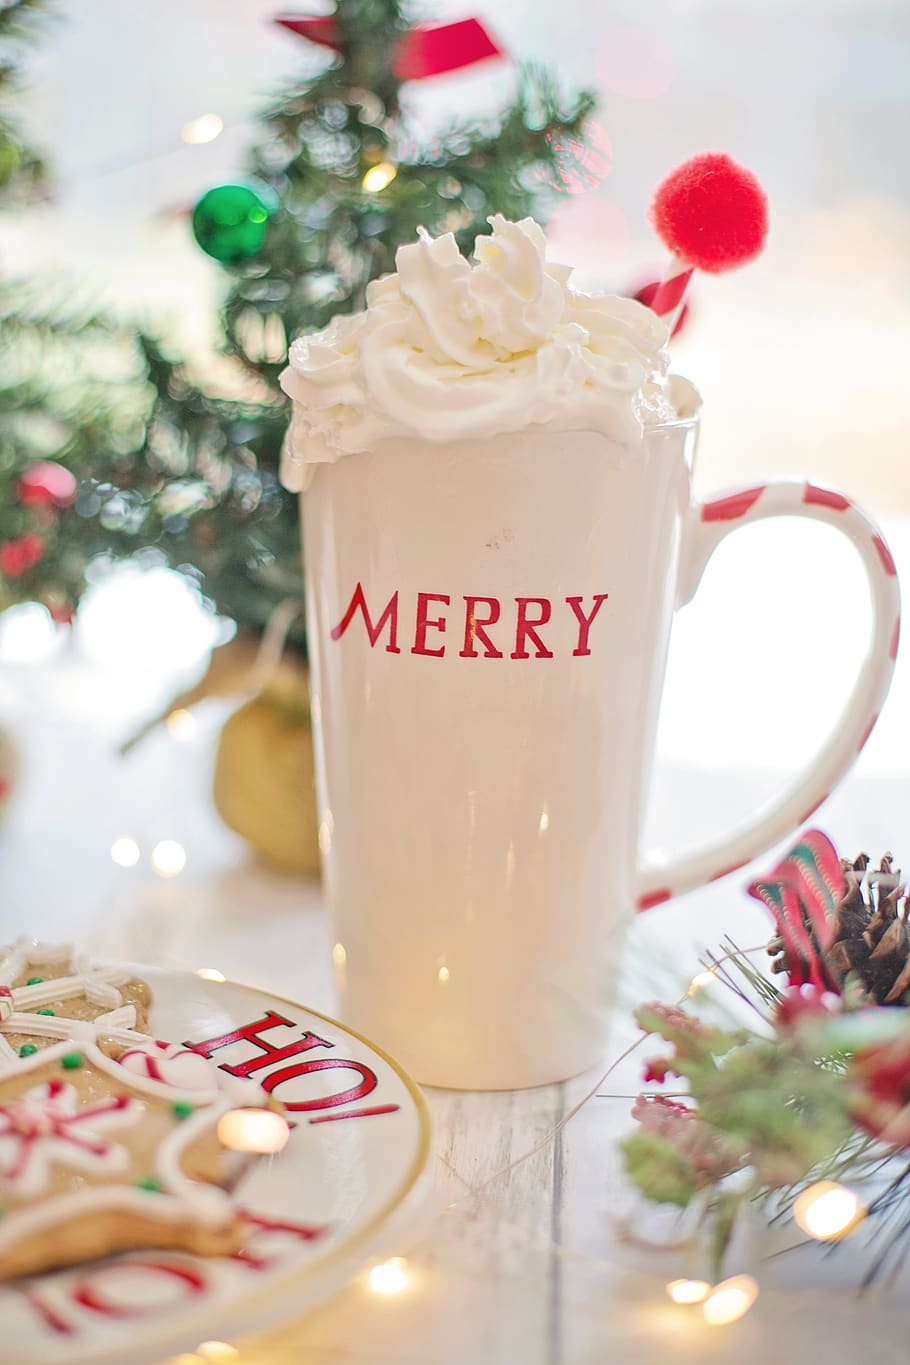 hot chocolate, whipped cream, merry, christmas, cocoa, hot, drink, mug, delicious, treat